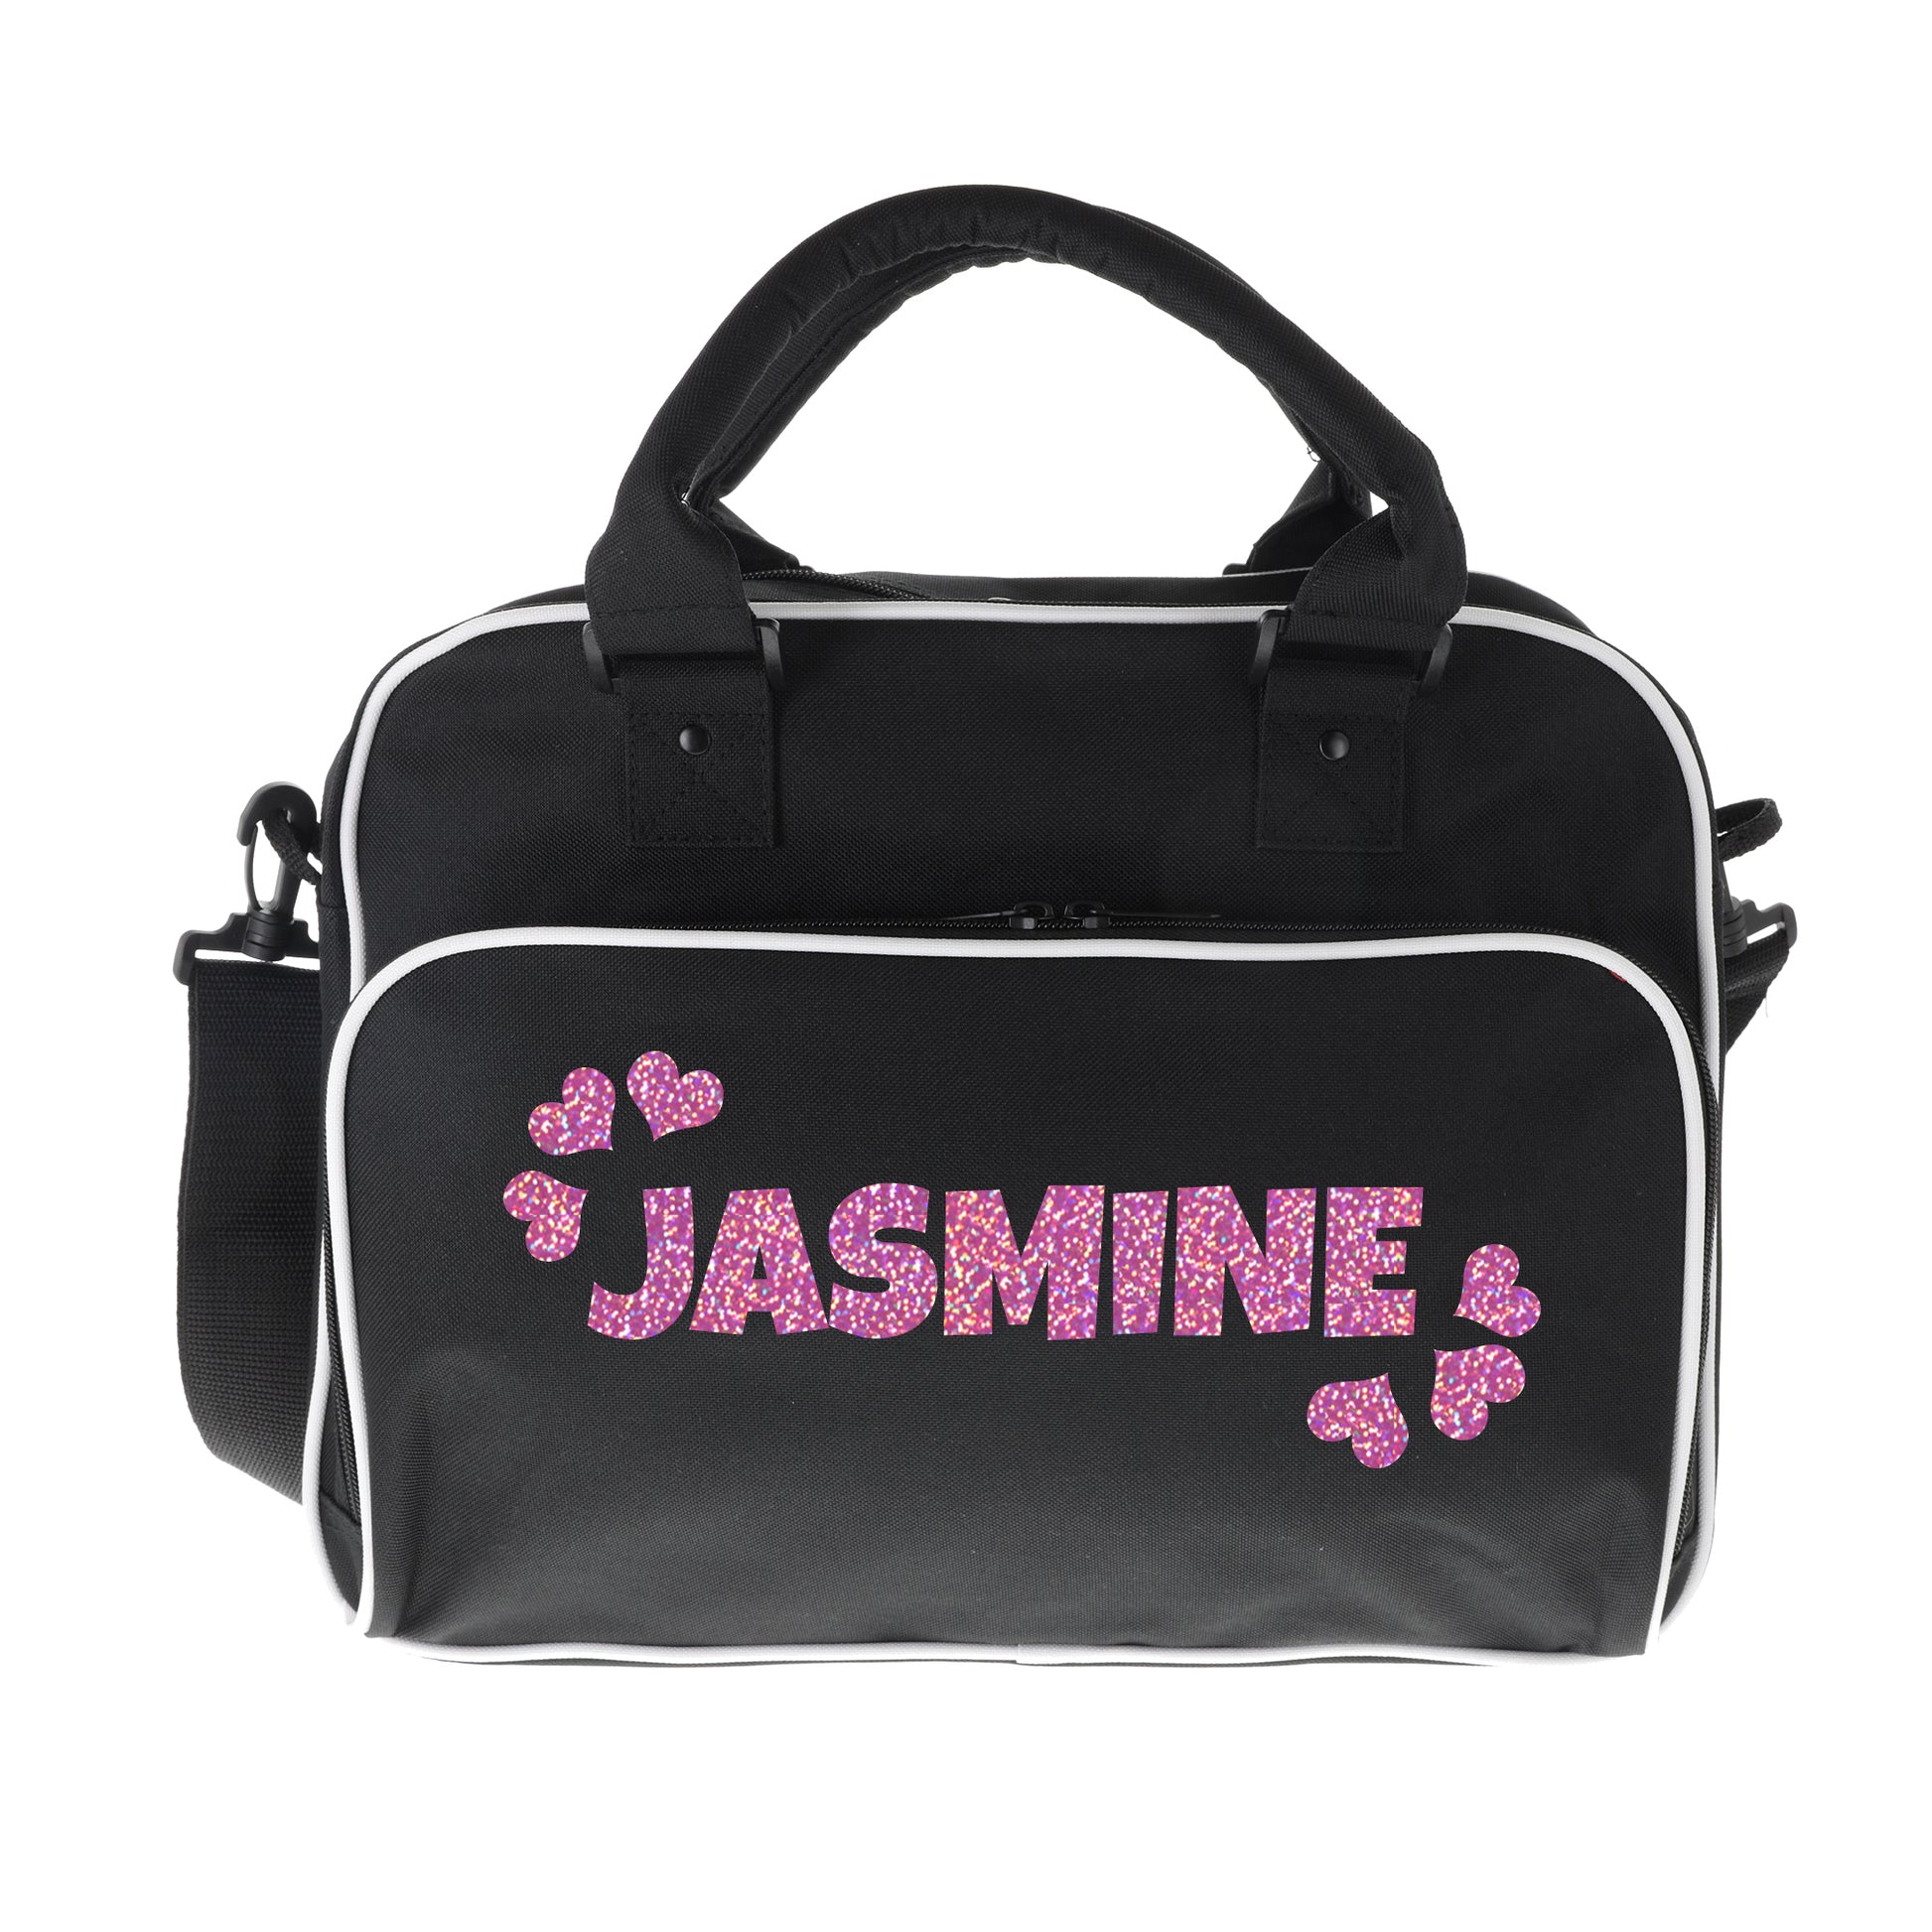 Personalised Girls Sports Bag with Name Dancing Swimming Gymnastic School Gym Bag  - Always Looking Good - Black with White Piping Name & Hearts 